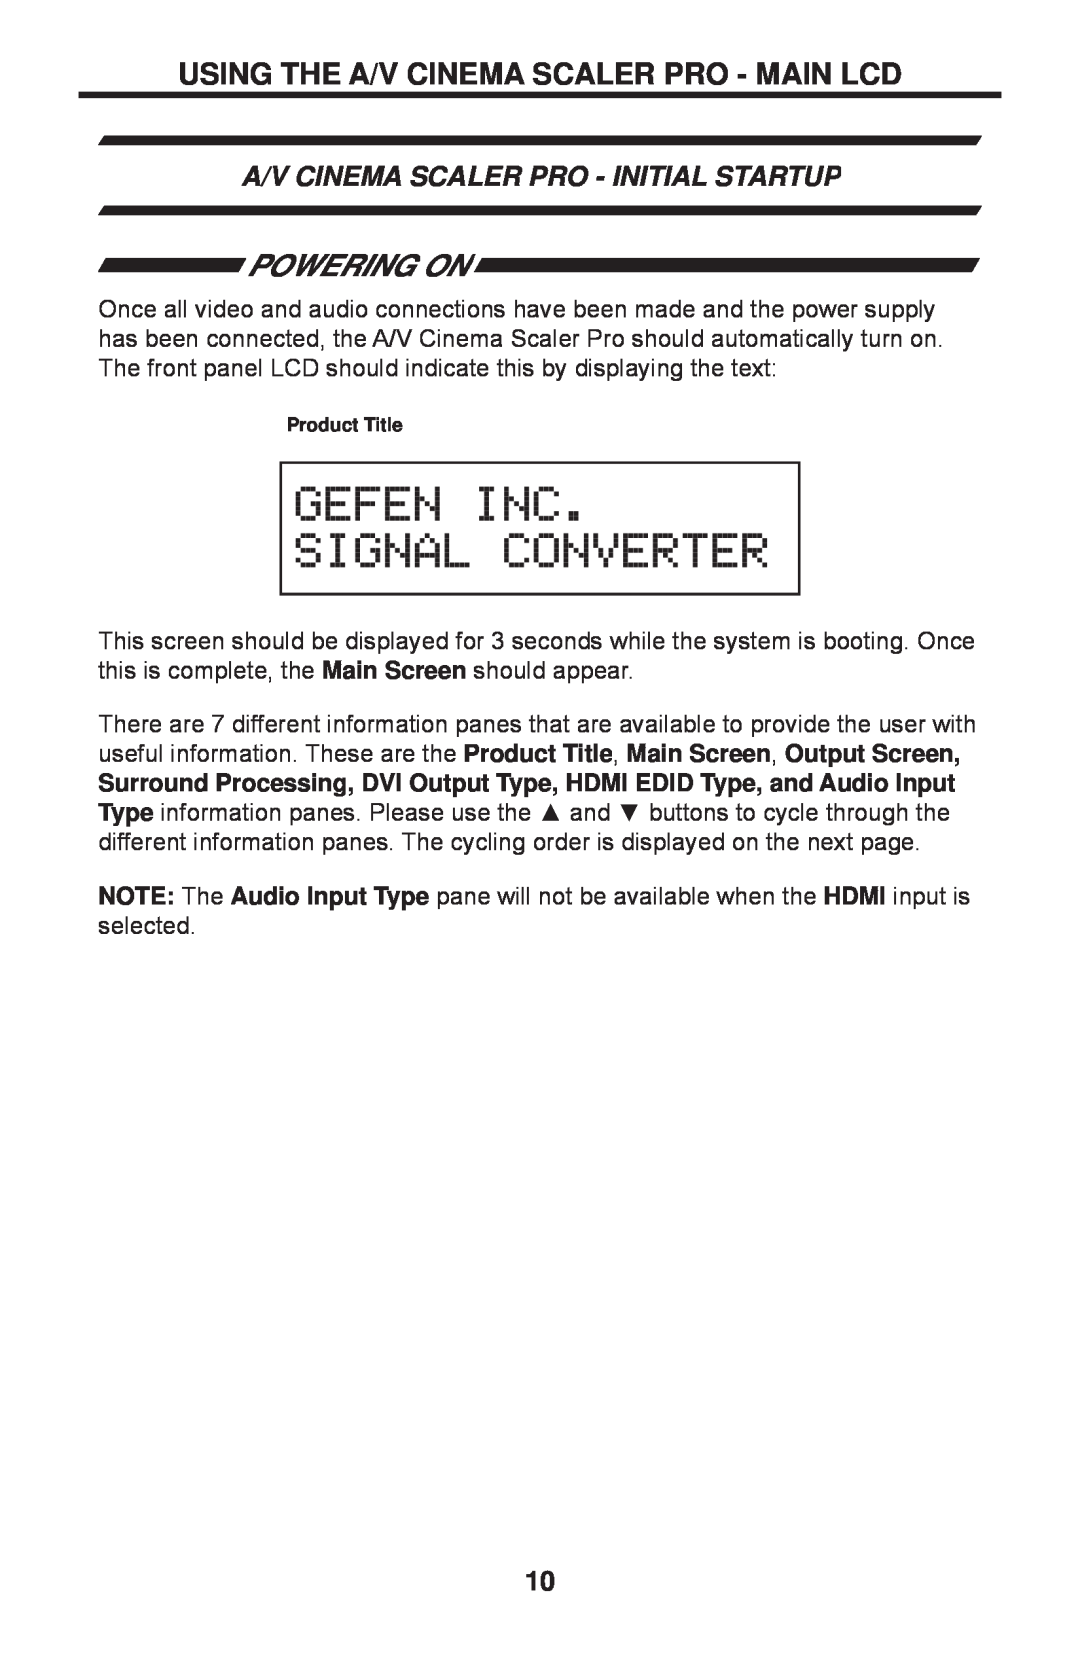 Gefen PRO I user manual Powering On, A/V Cinema Scaler Pro - Initial Startup, Using The A/V Cinema Scaler Pro - Main Lcd 